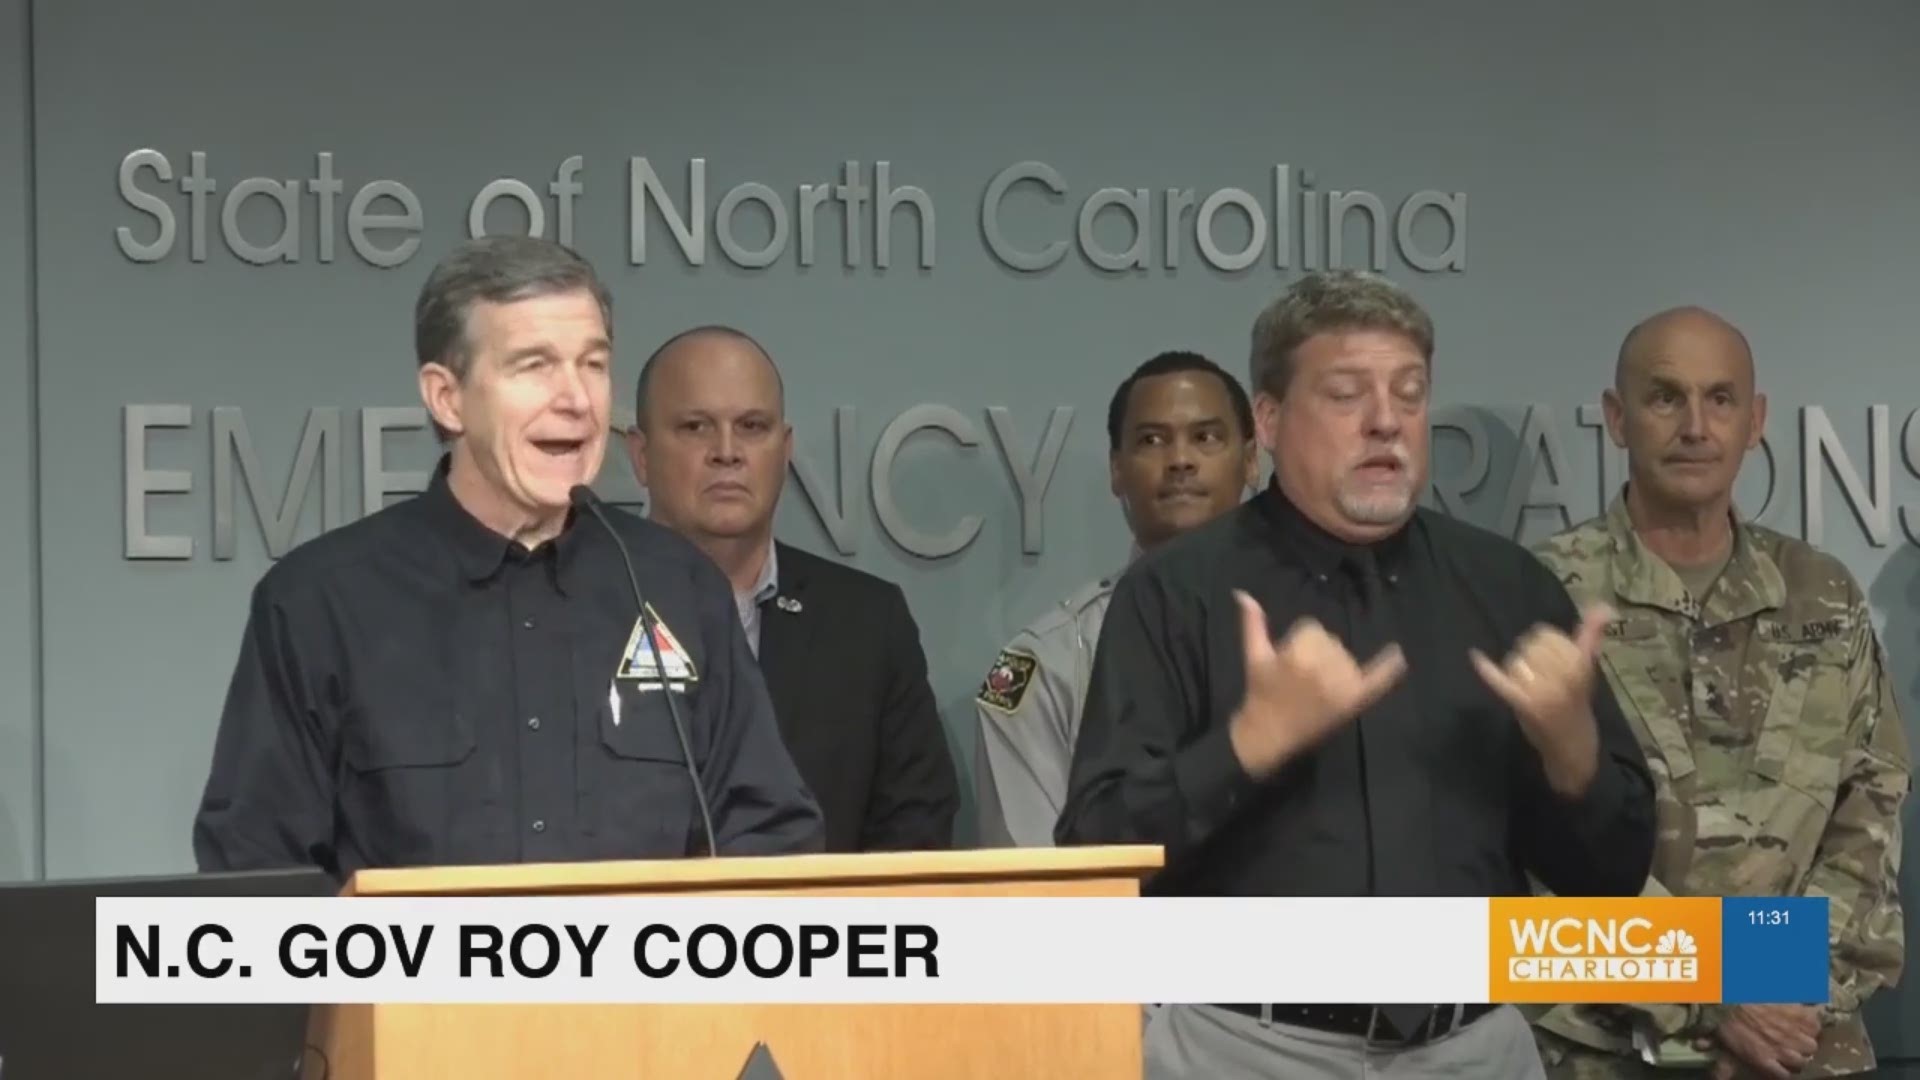 An 85-year-old man preparing for Hurricane Dorian in North Carolina died after he fell off a ladder, according to North Carolina Governor Roy Cooper. The elderly man is the state's first death related to the storm.